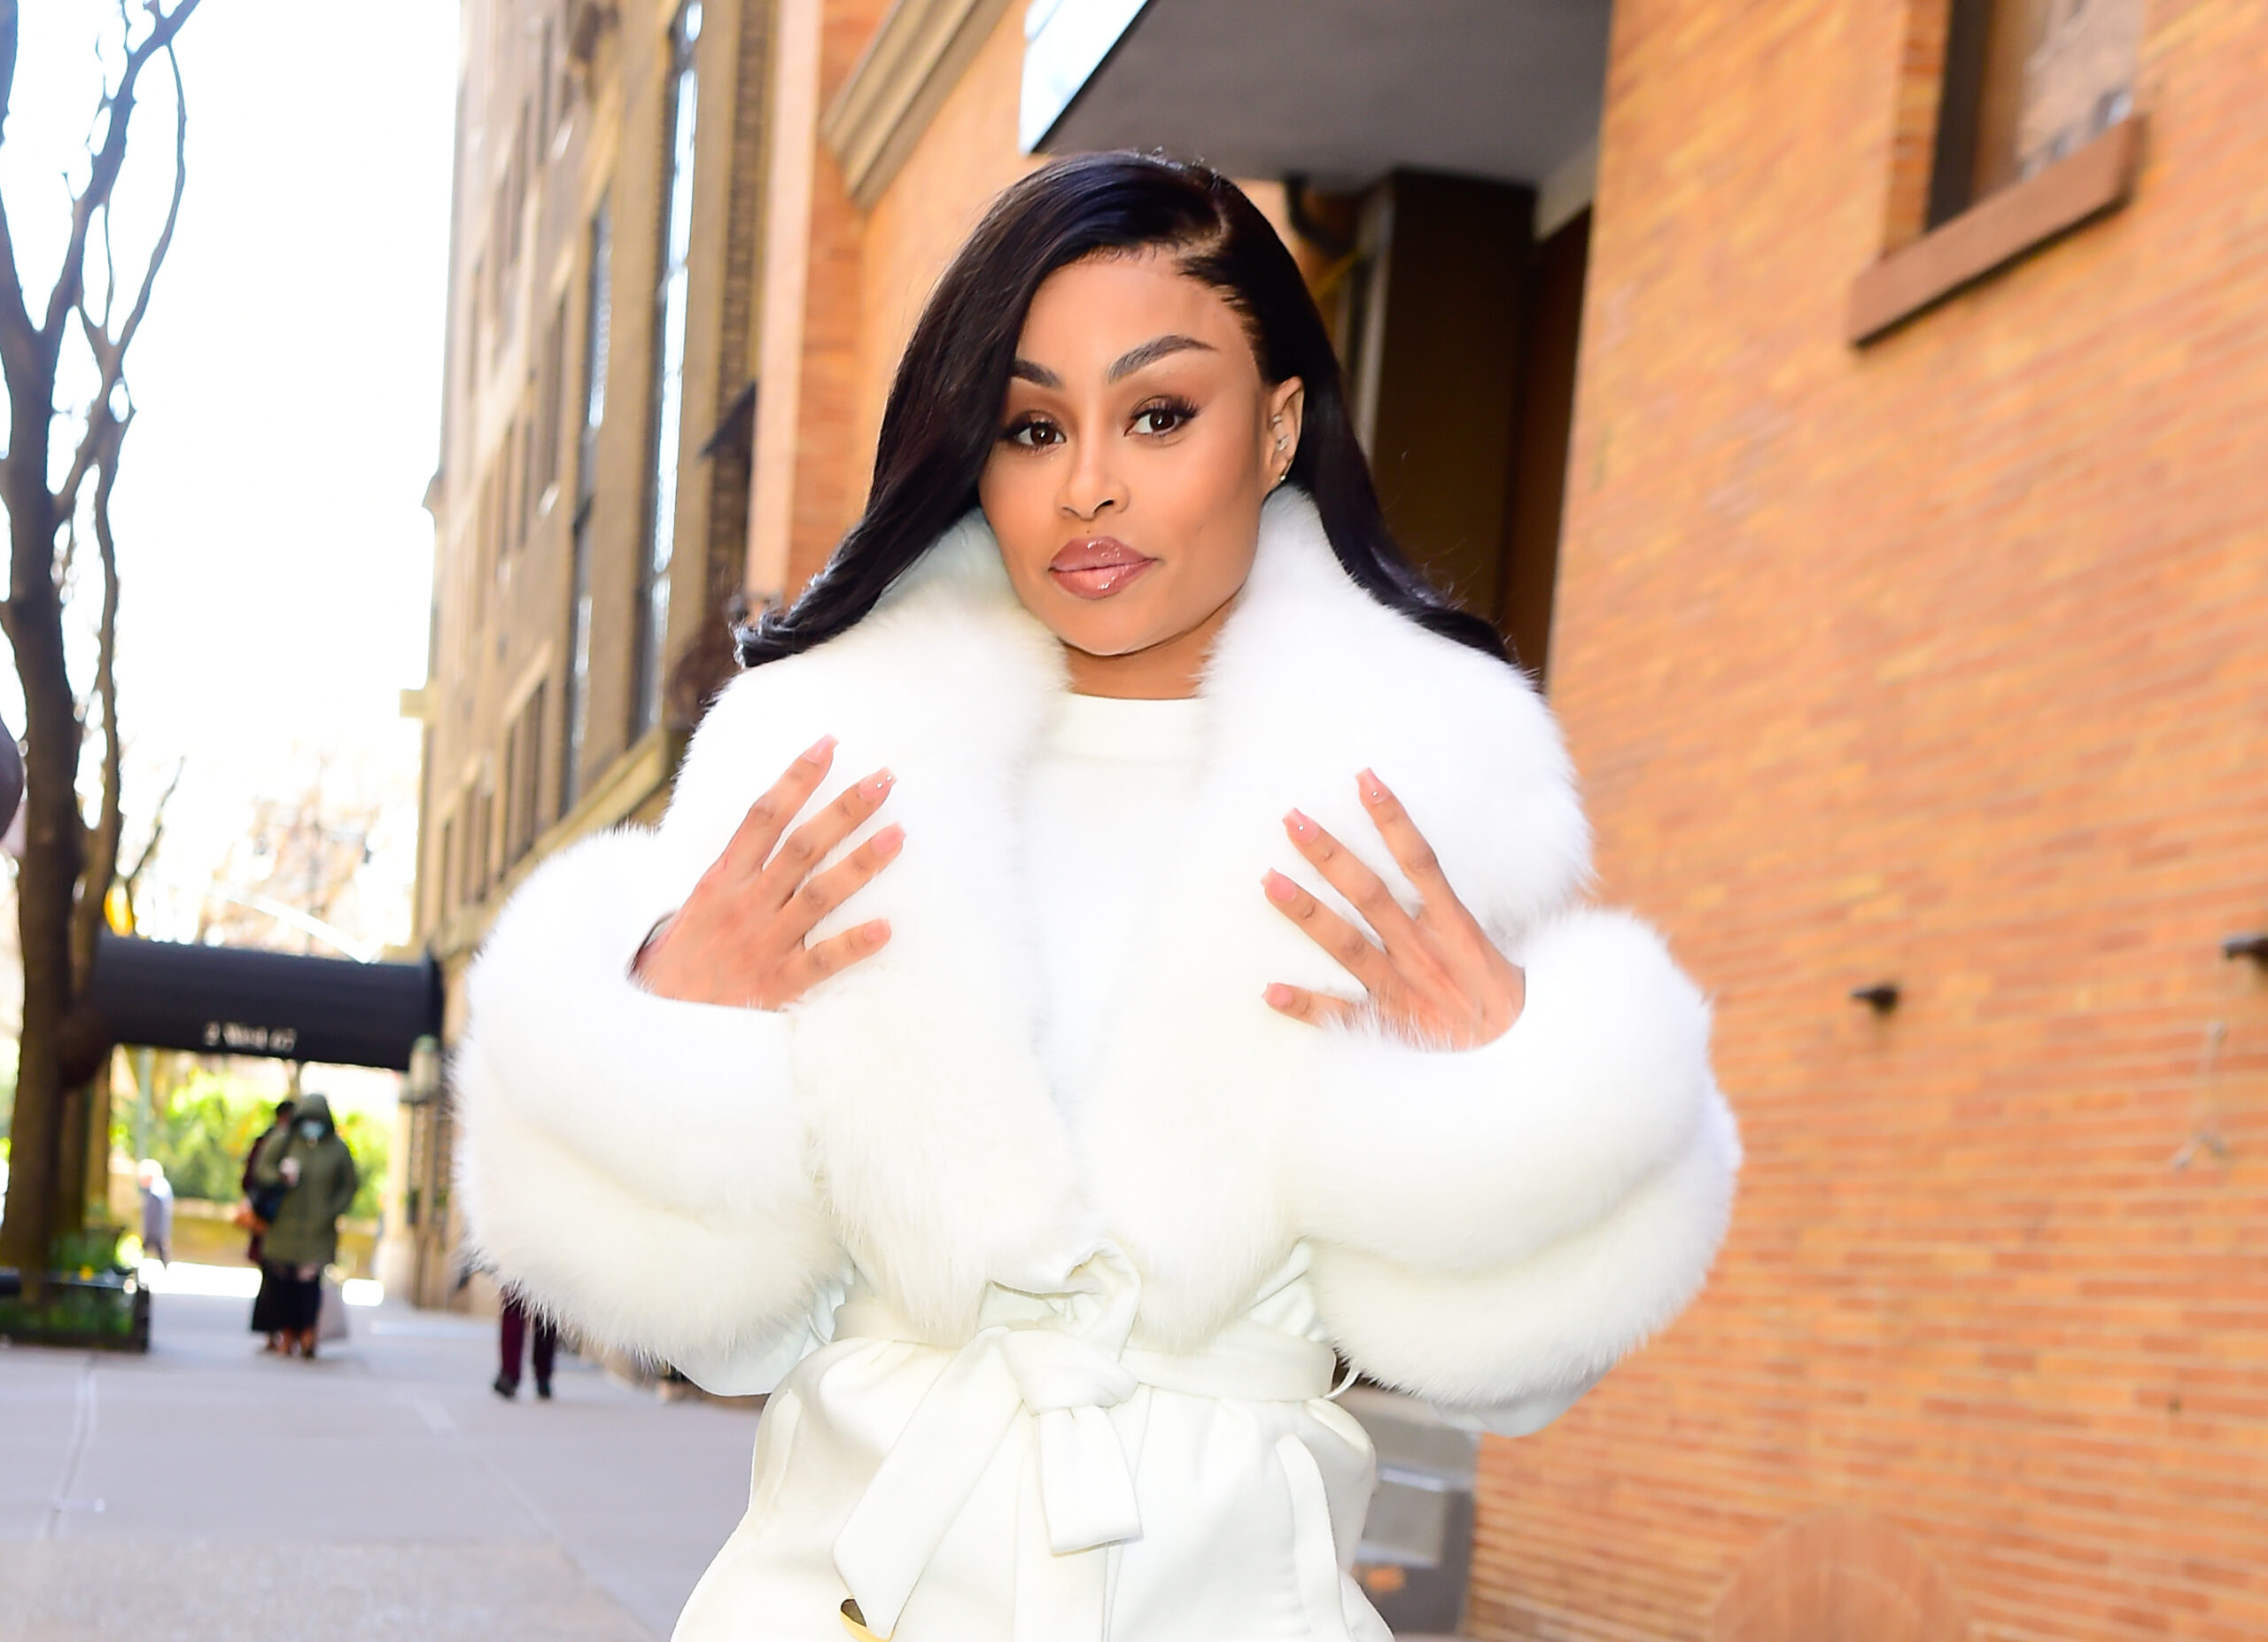 Is Blac Chyna Single? Model’s New Photo With Derrick Milano Suggests Not